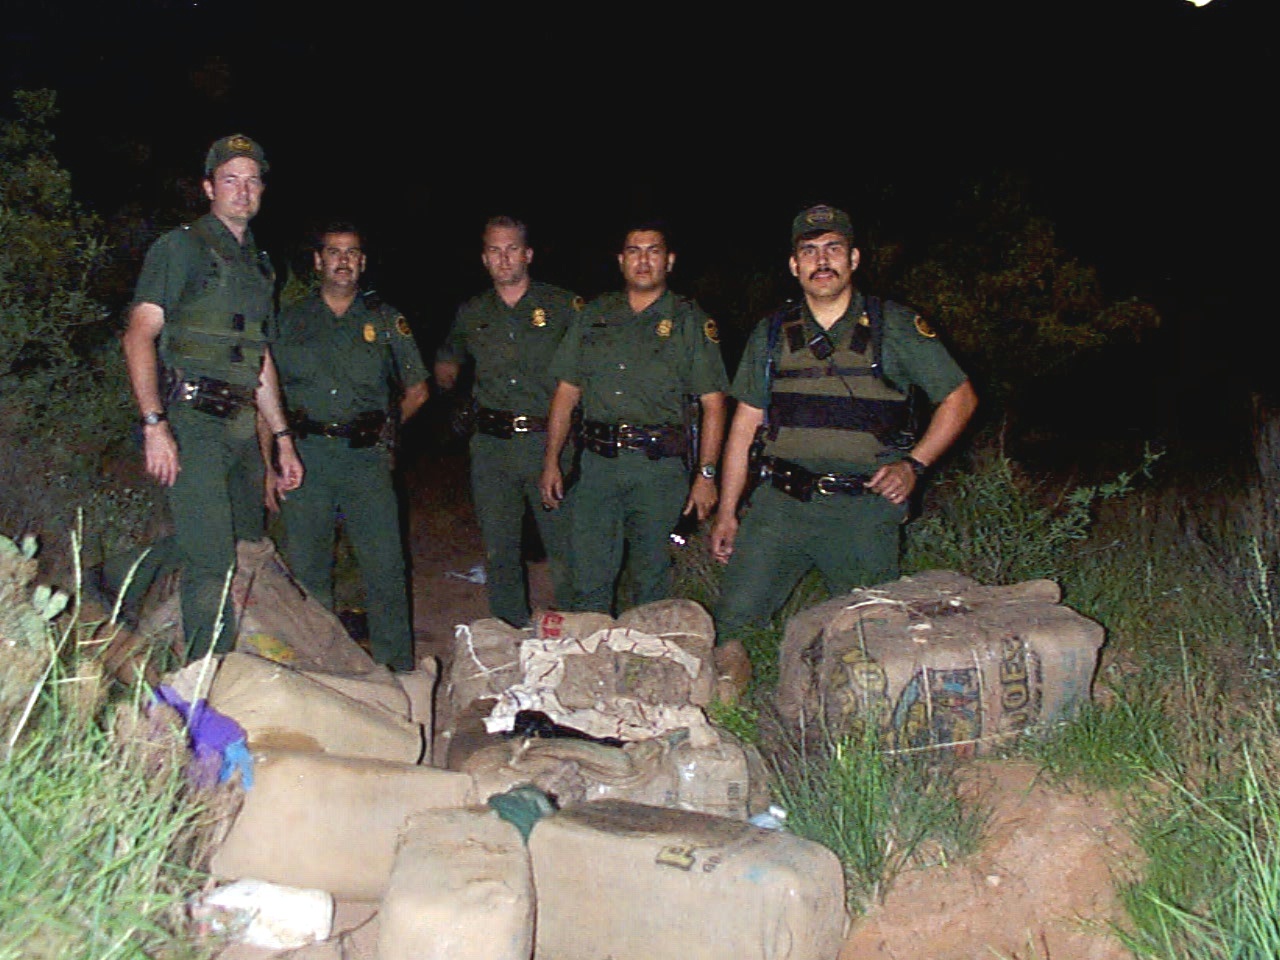 Teamwork helped to catch this load of marijuana.